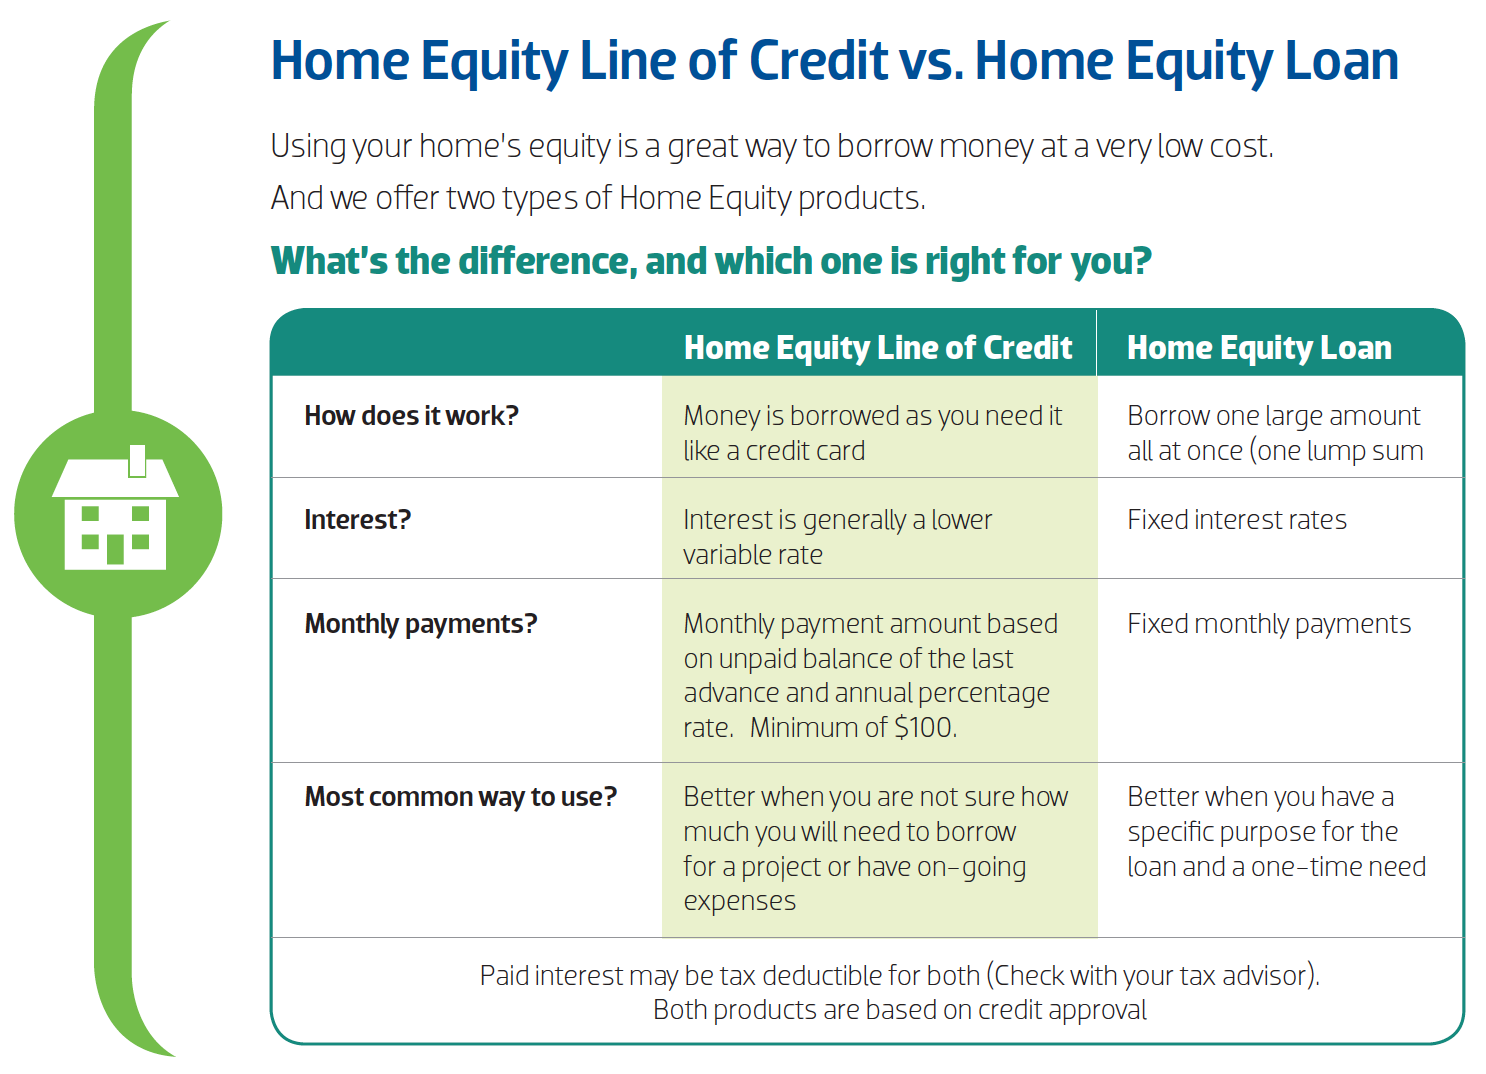 Home Equity vs Home Equity LOC